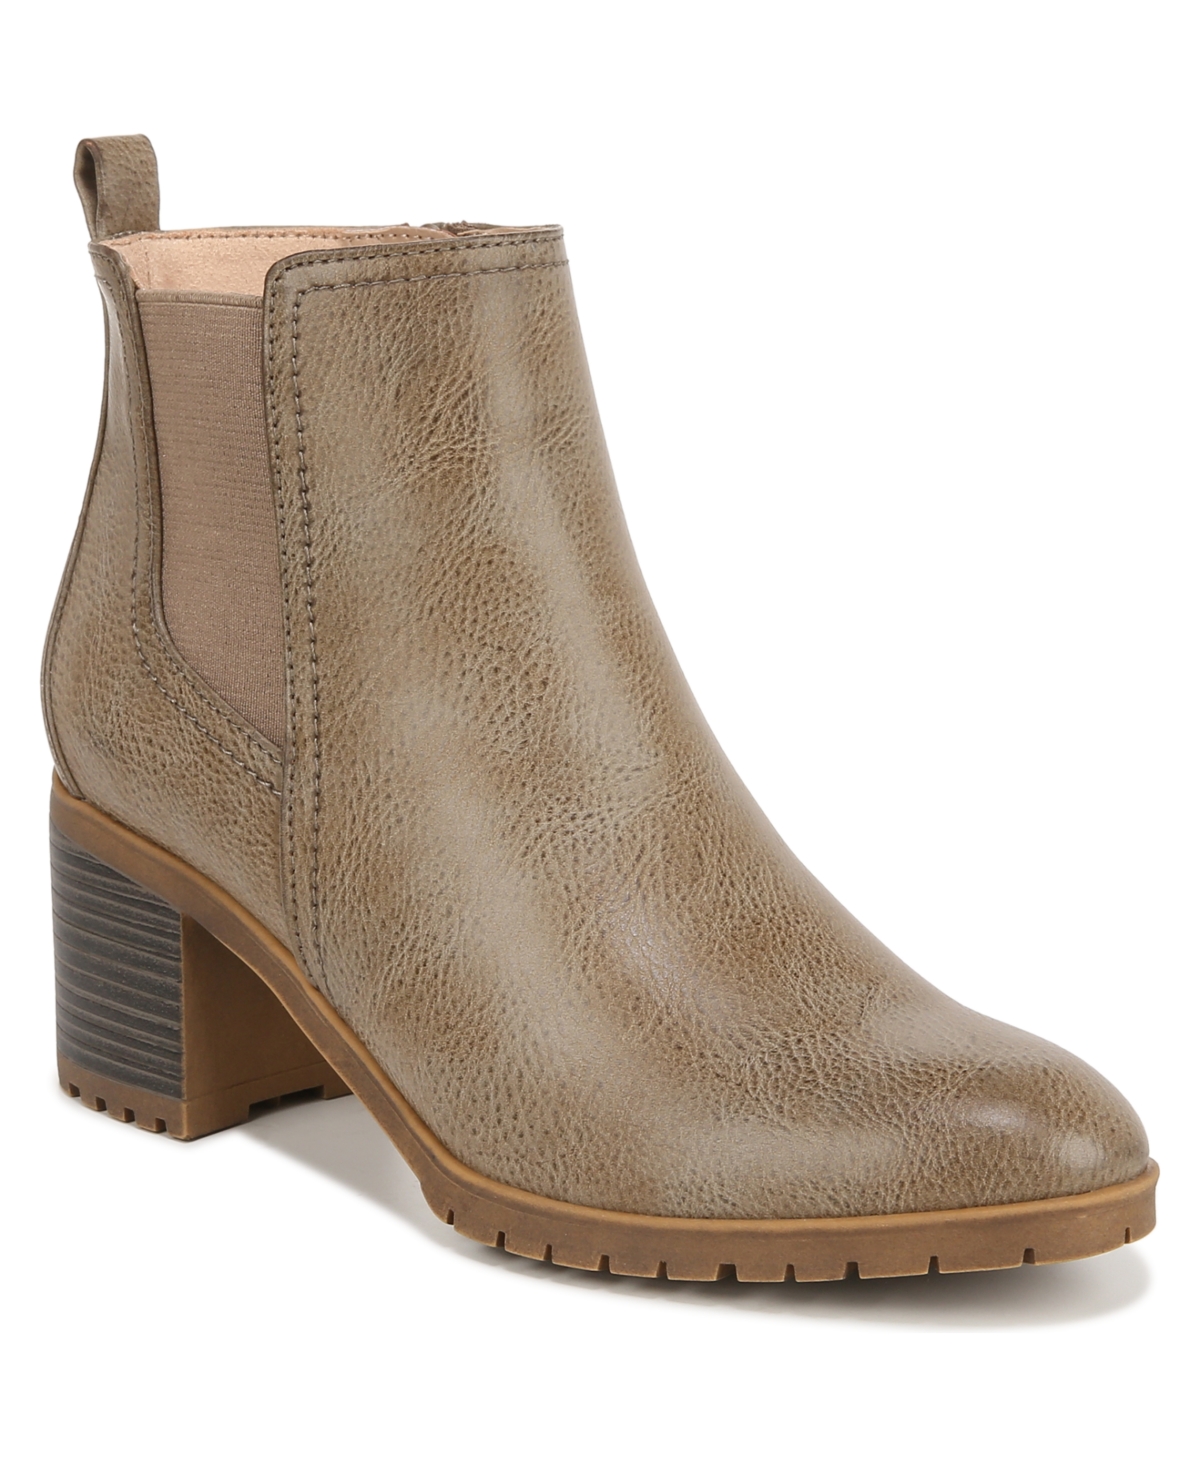 Mesa Lug Sole Booties - Stone Beige Faux Leather